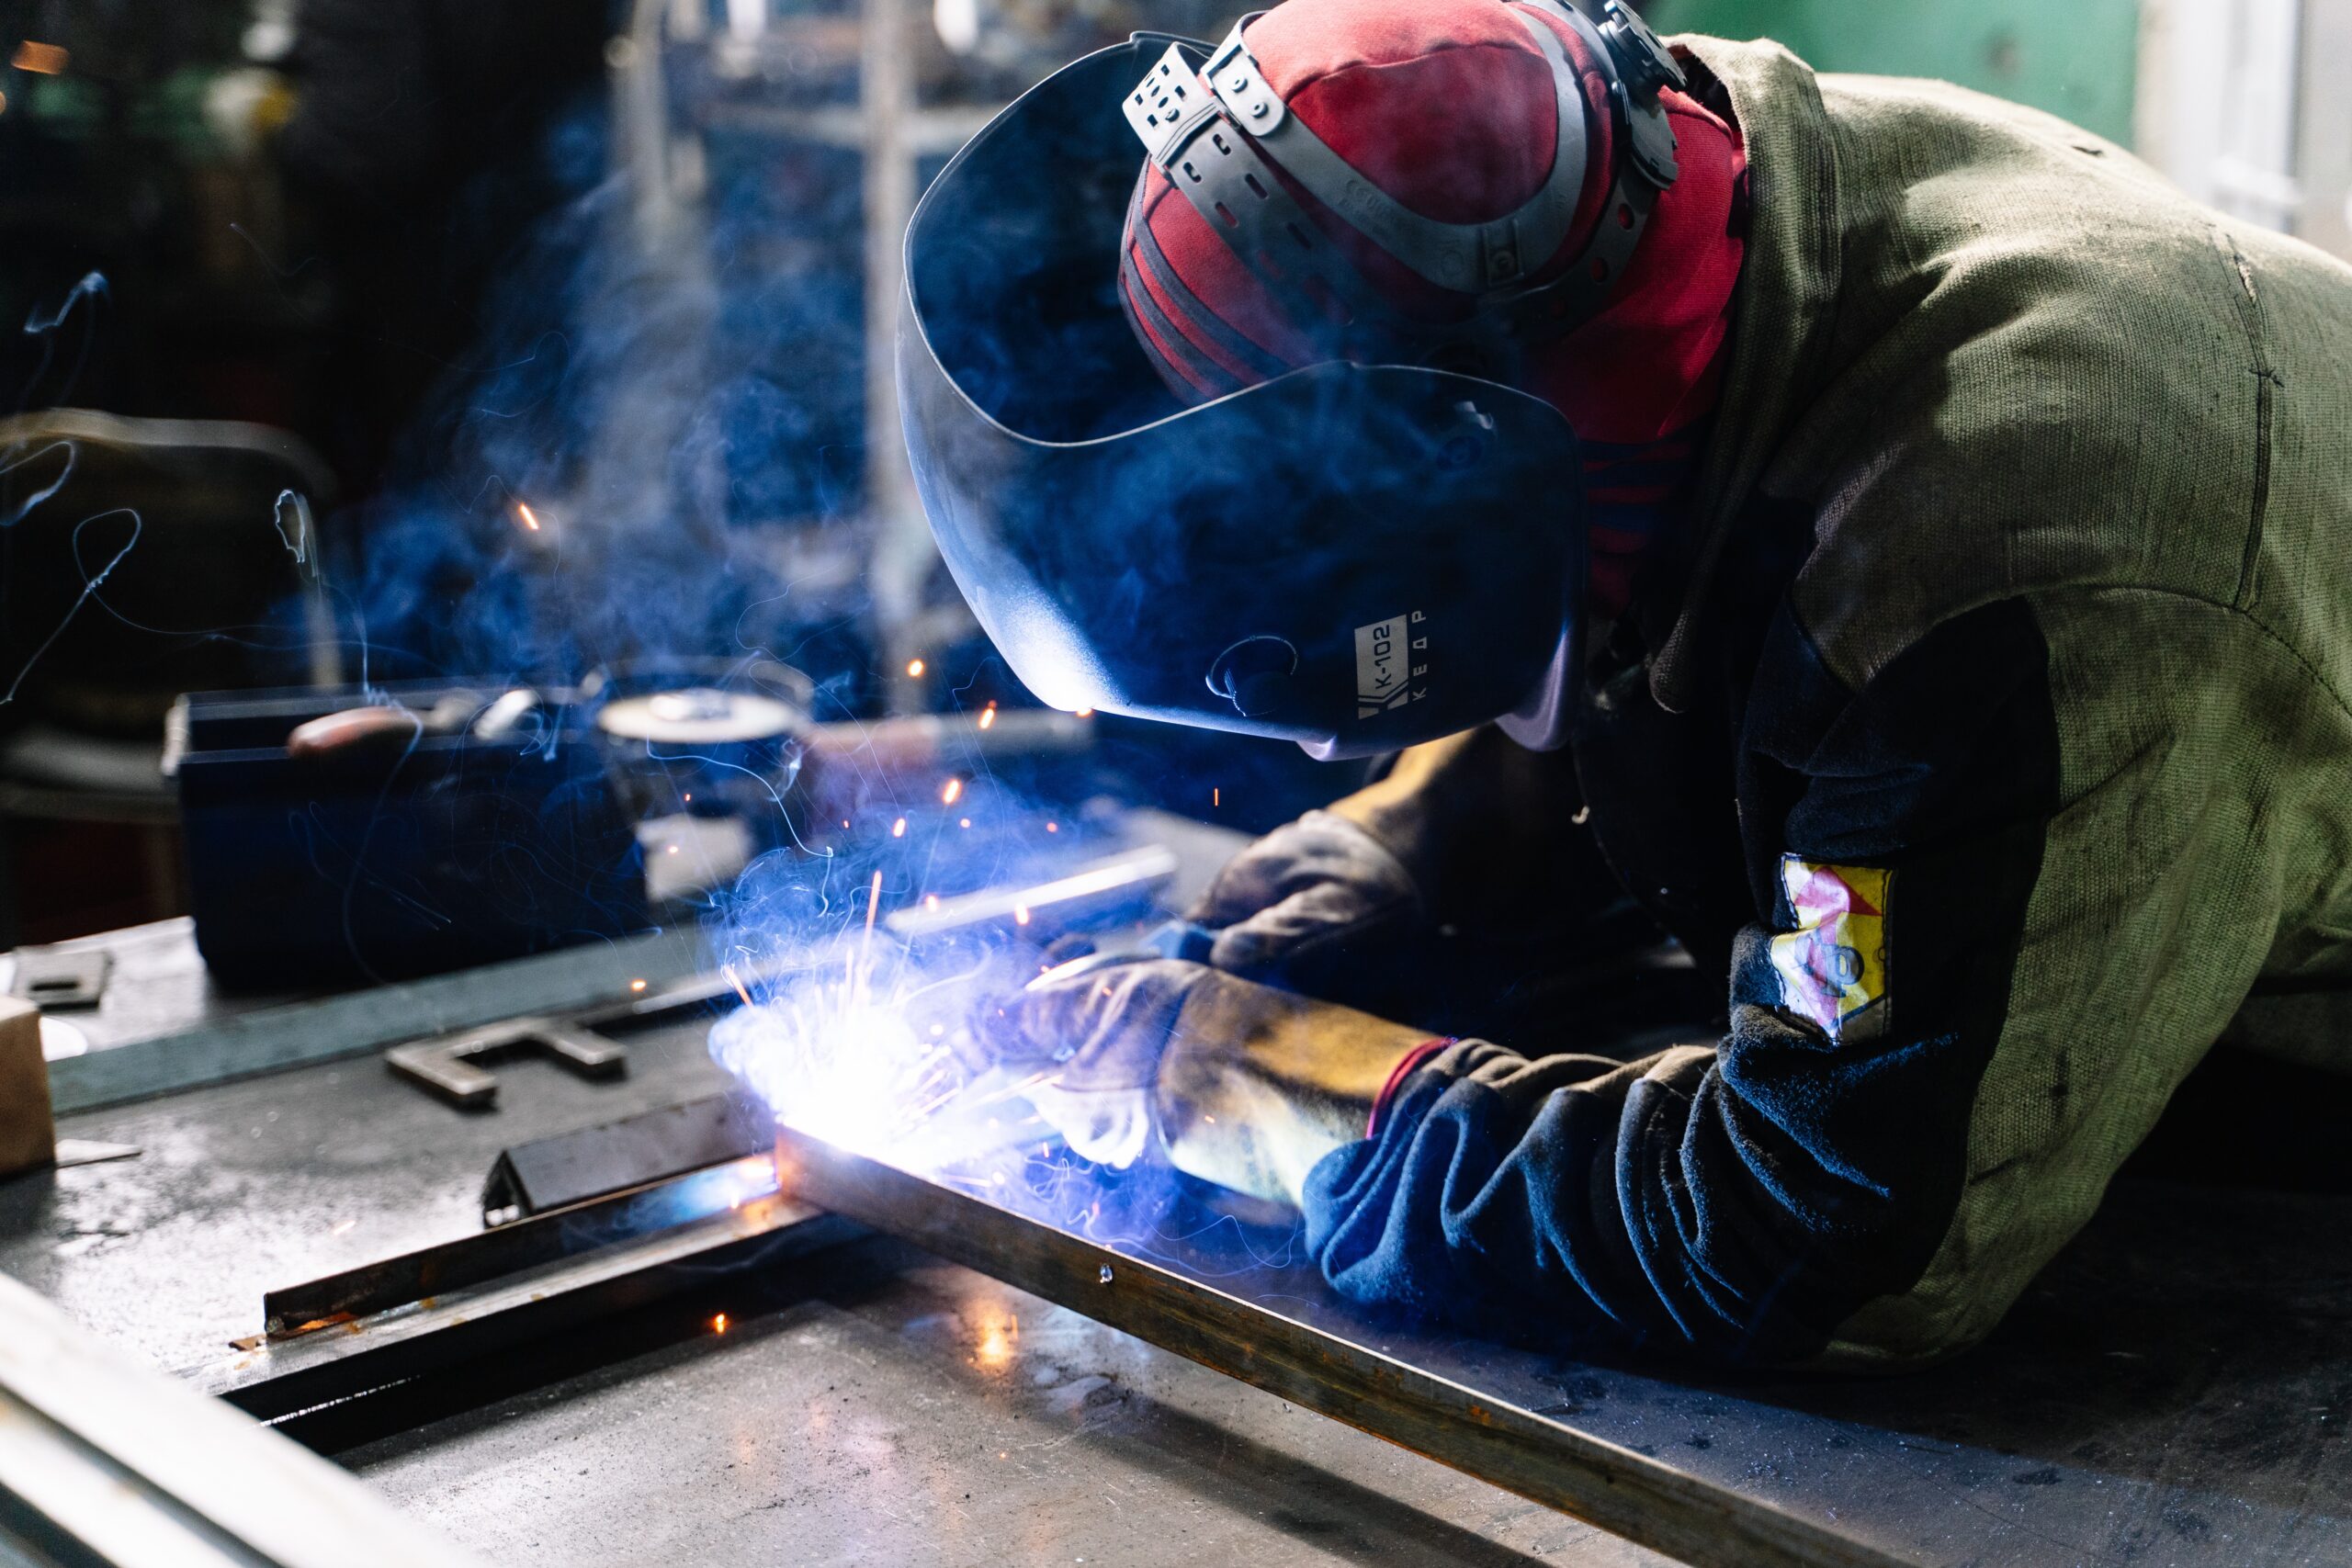 a man welding, with blue sparks near his hands